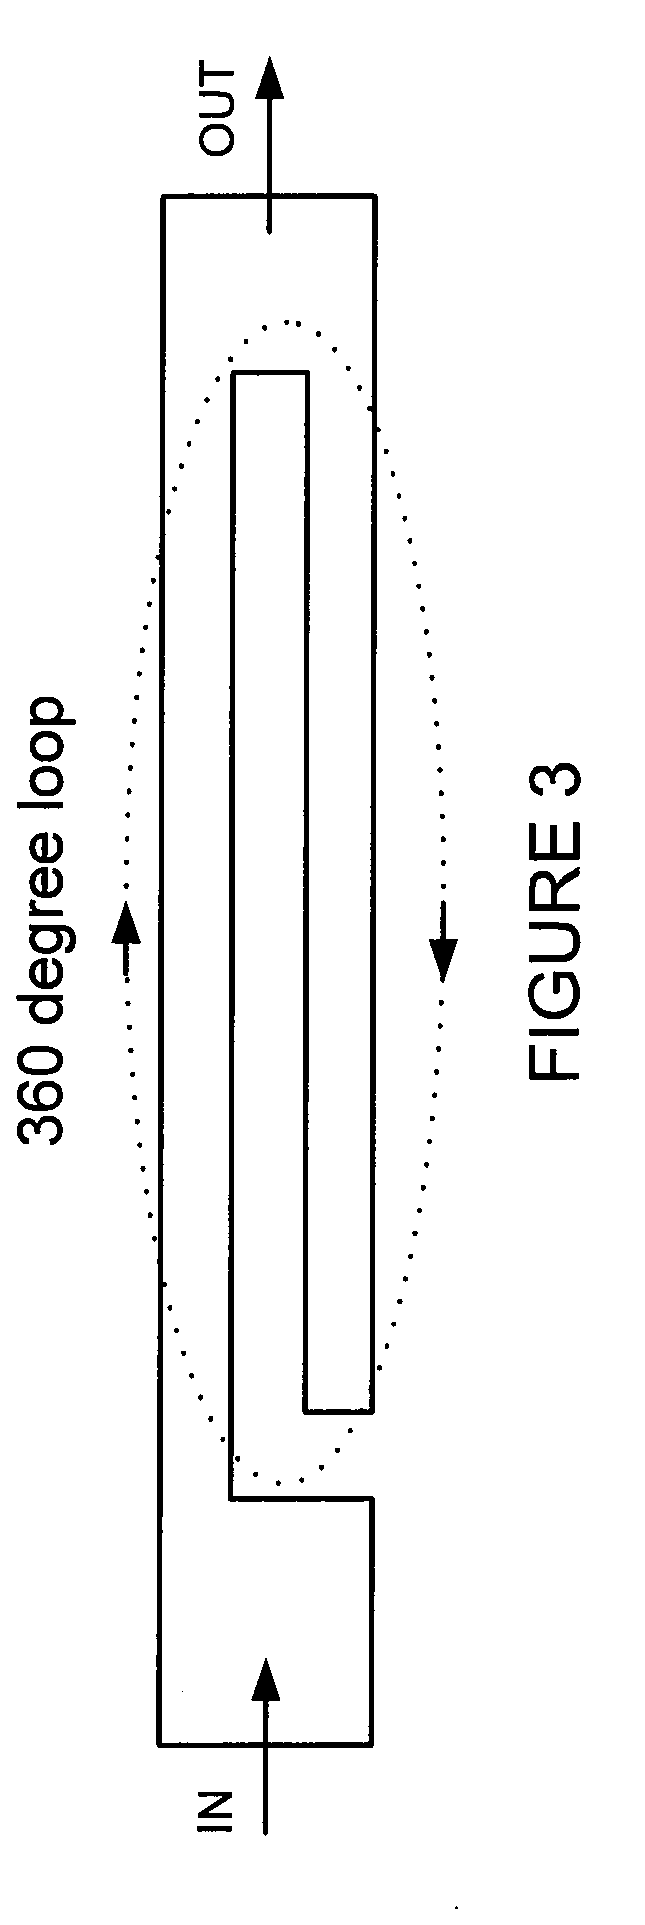 Capacitively loaded spurline filter